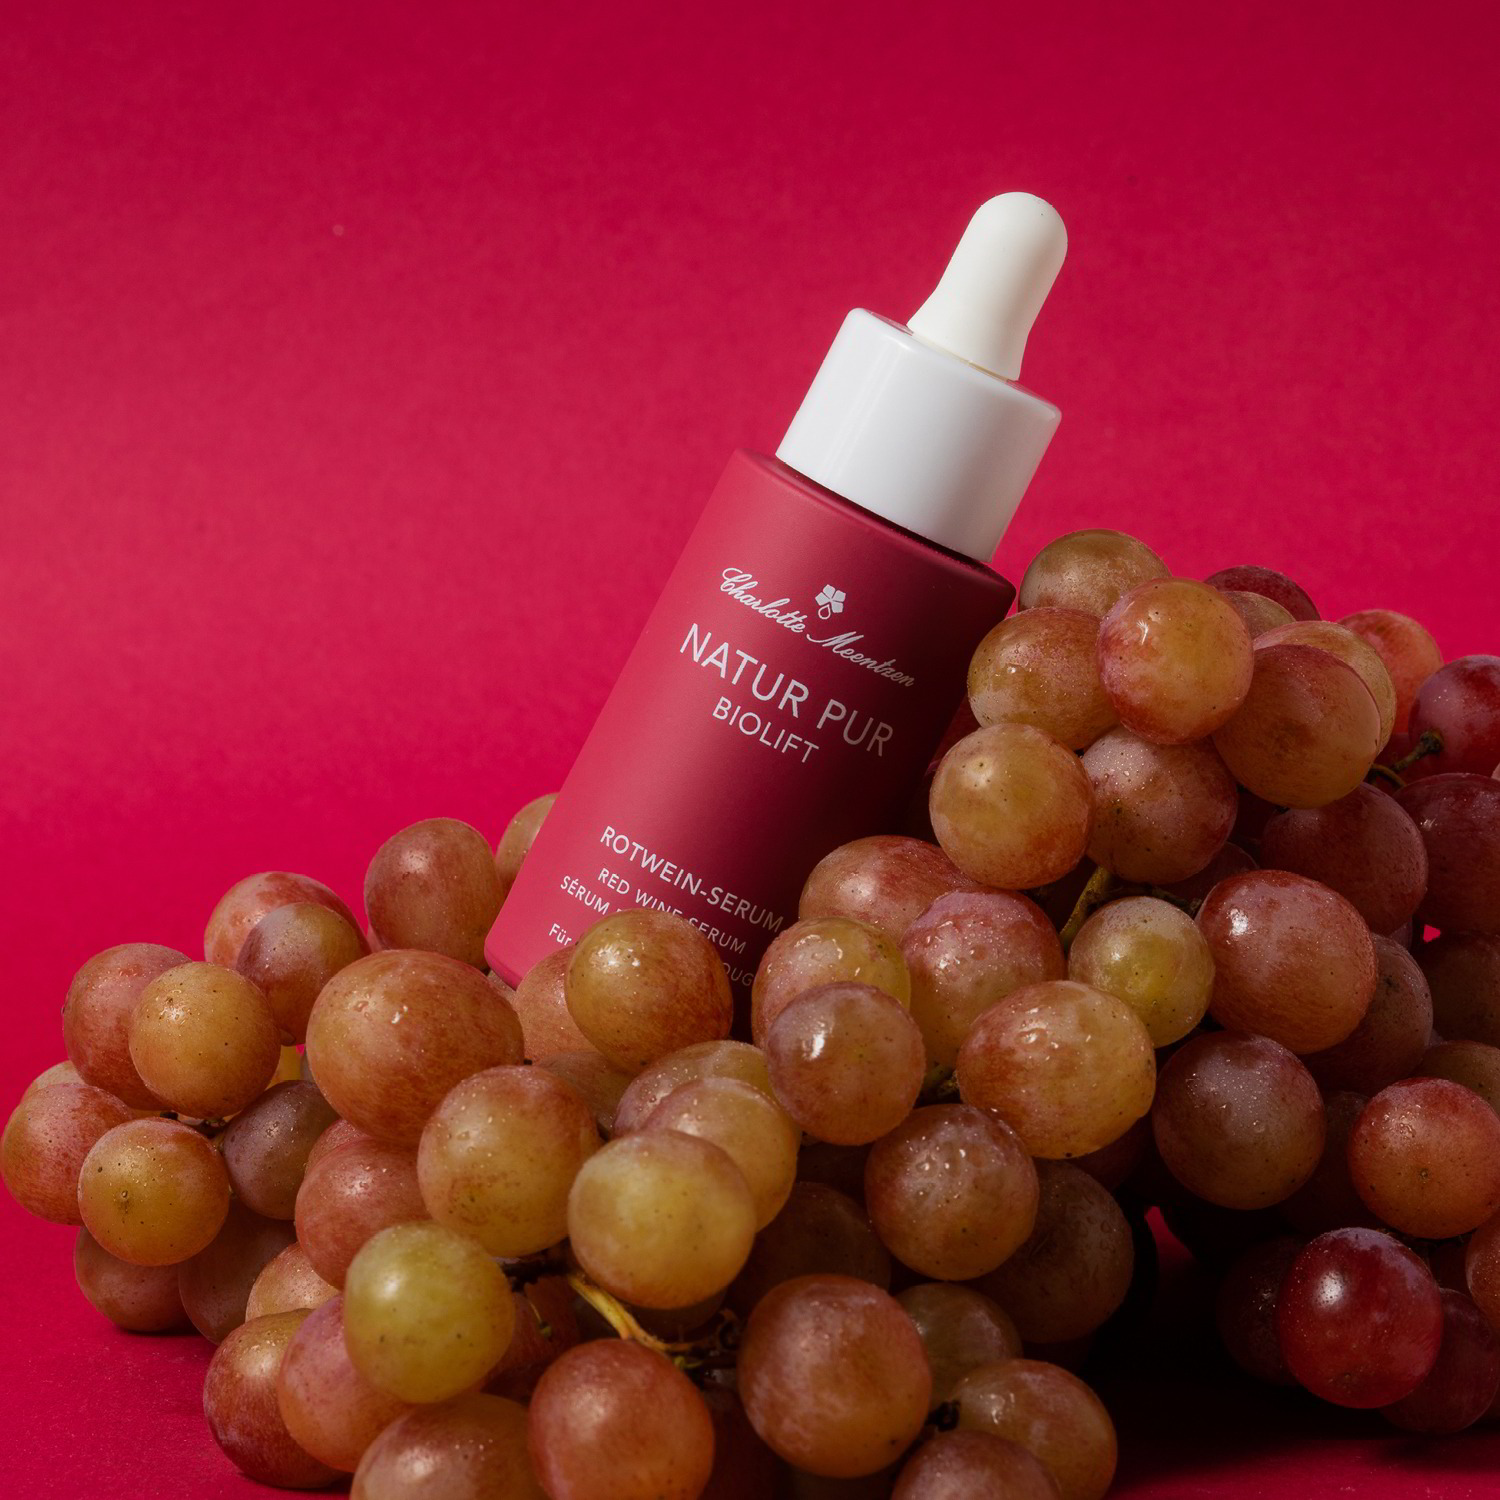 Natur Pur BIOLIFT red wine serum on grapes against a red background